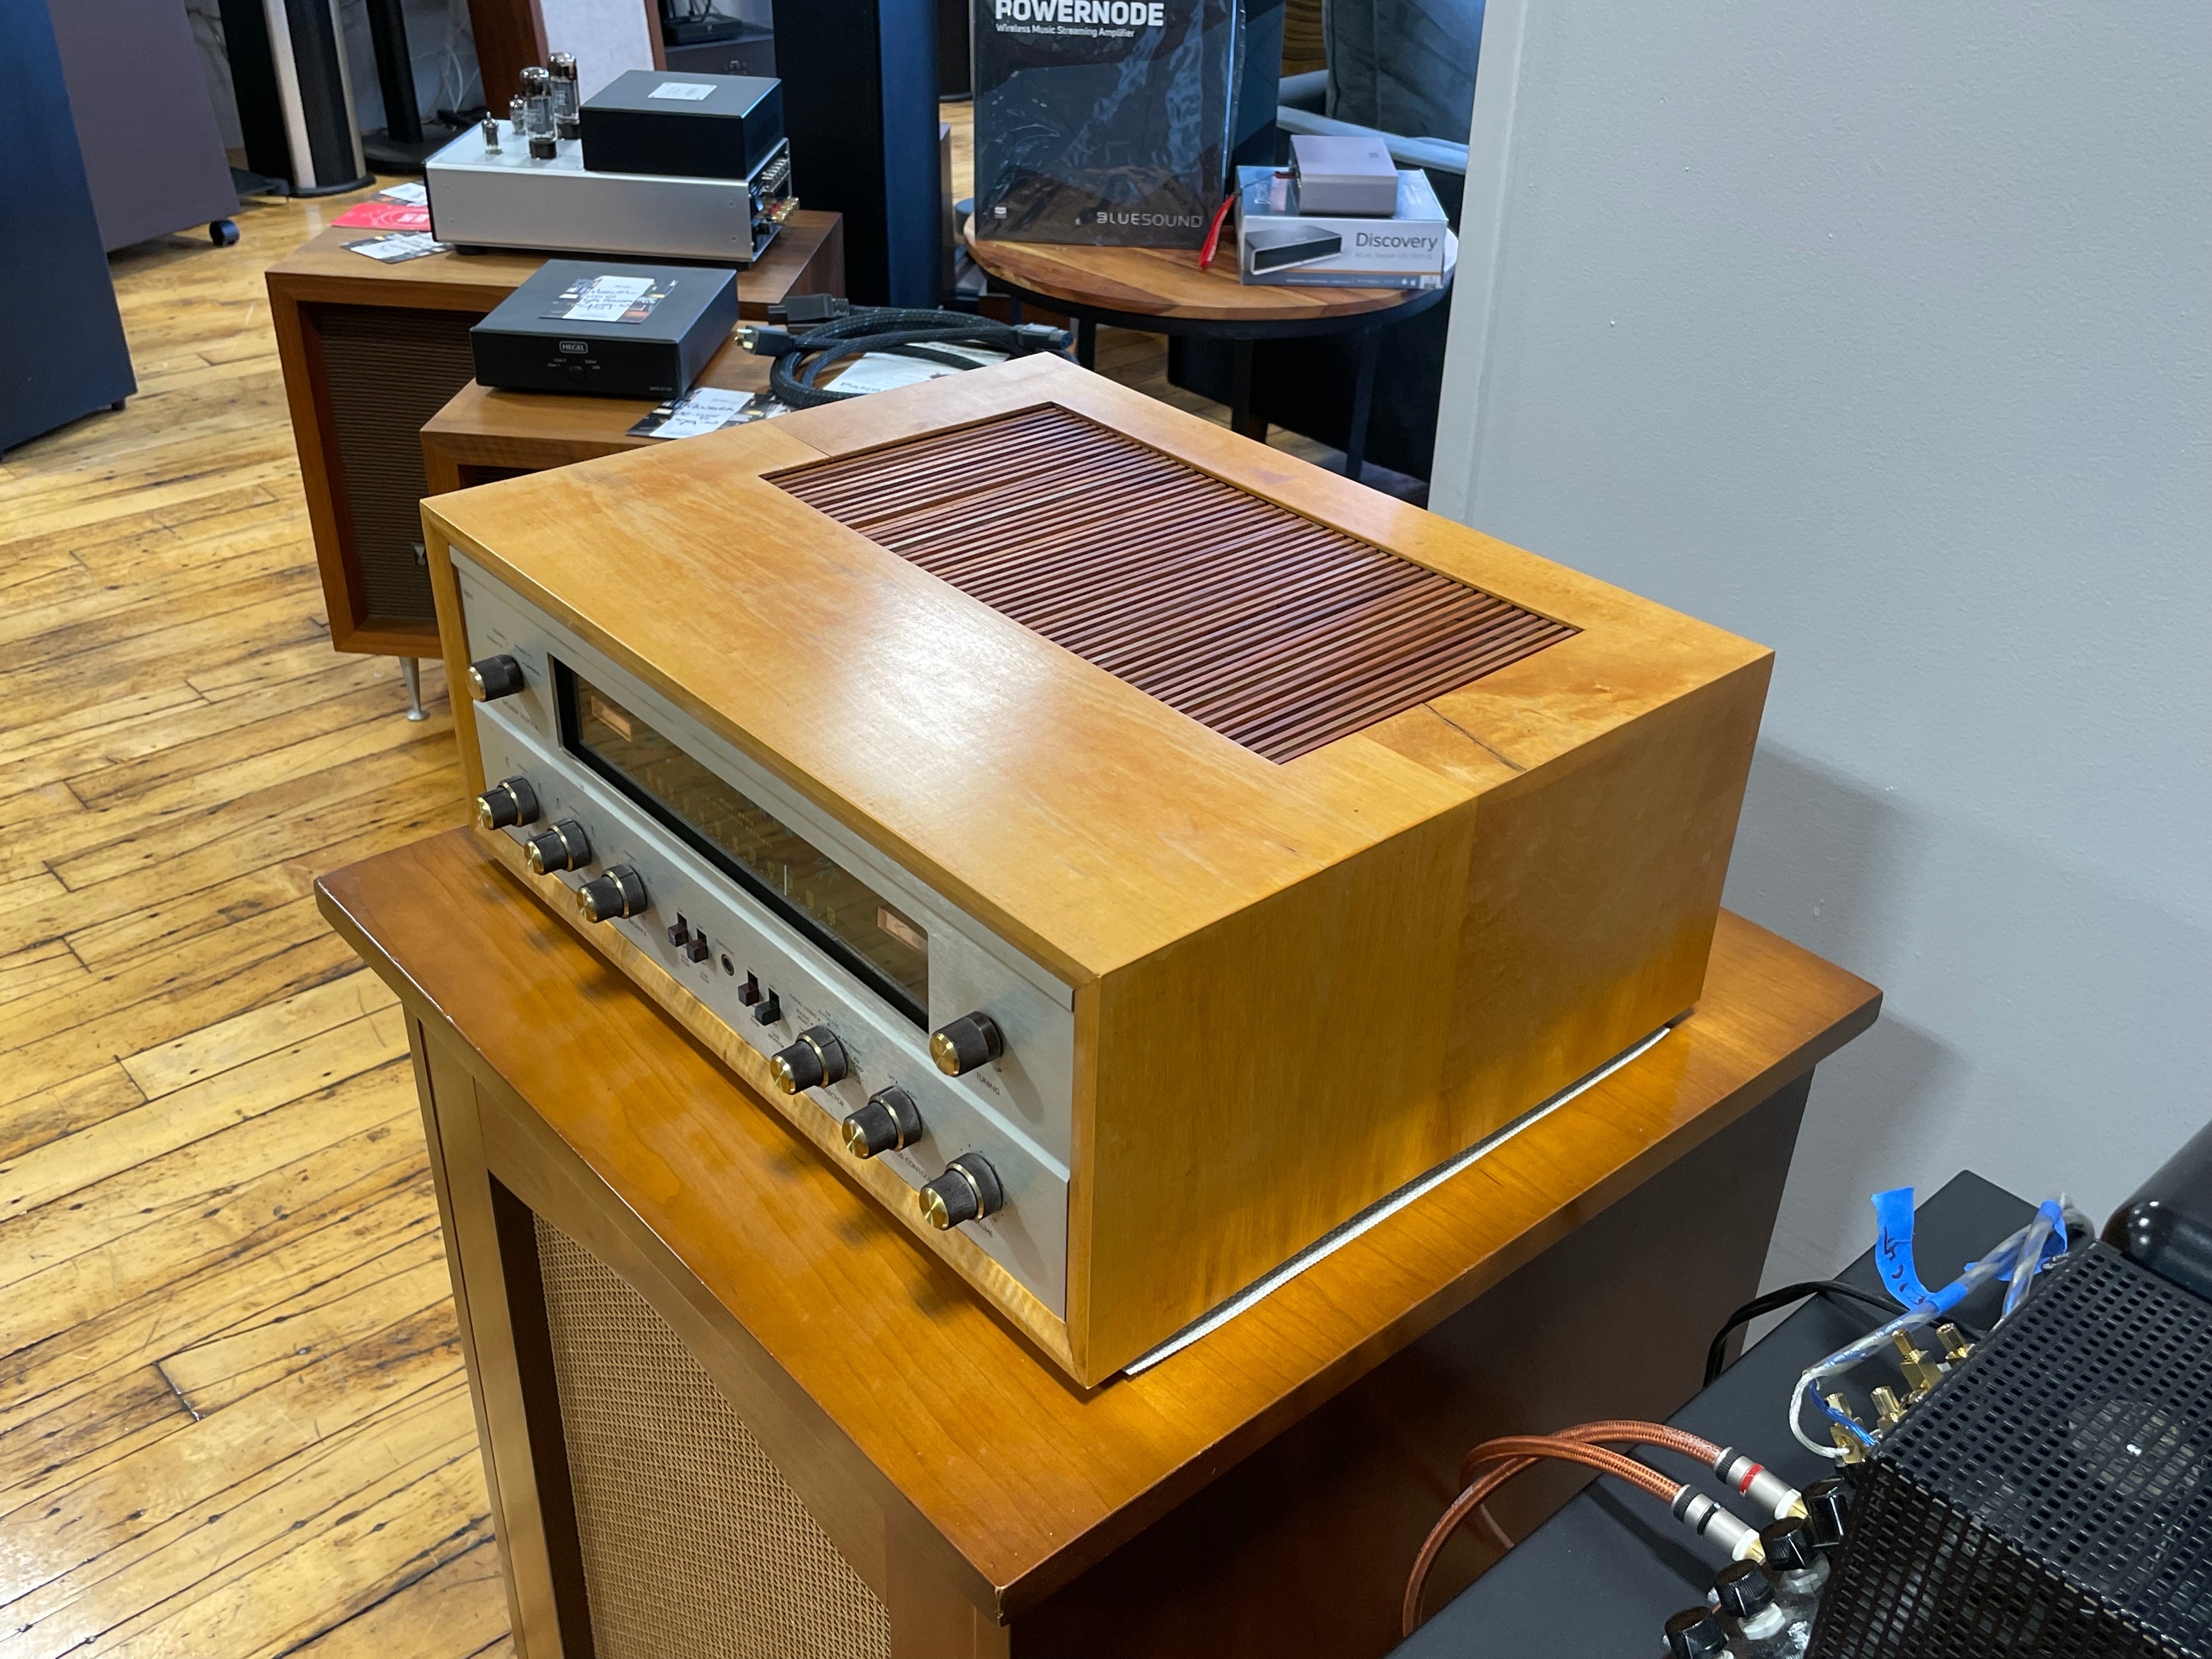 The Fisher 500C Tube Receiver - Just Lovely!